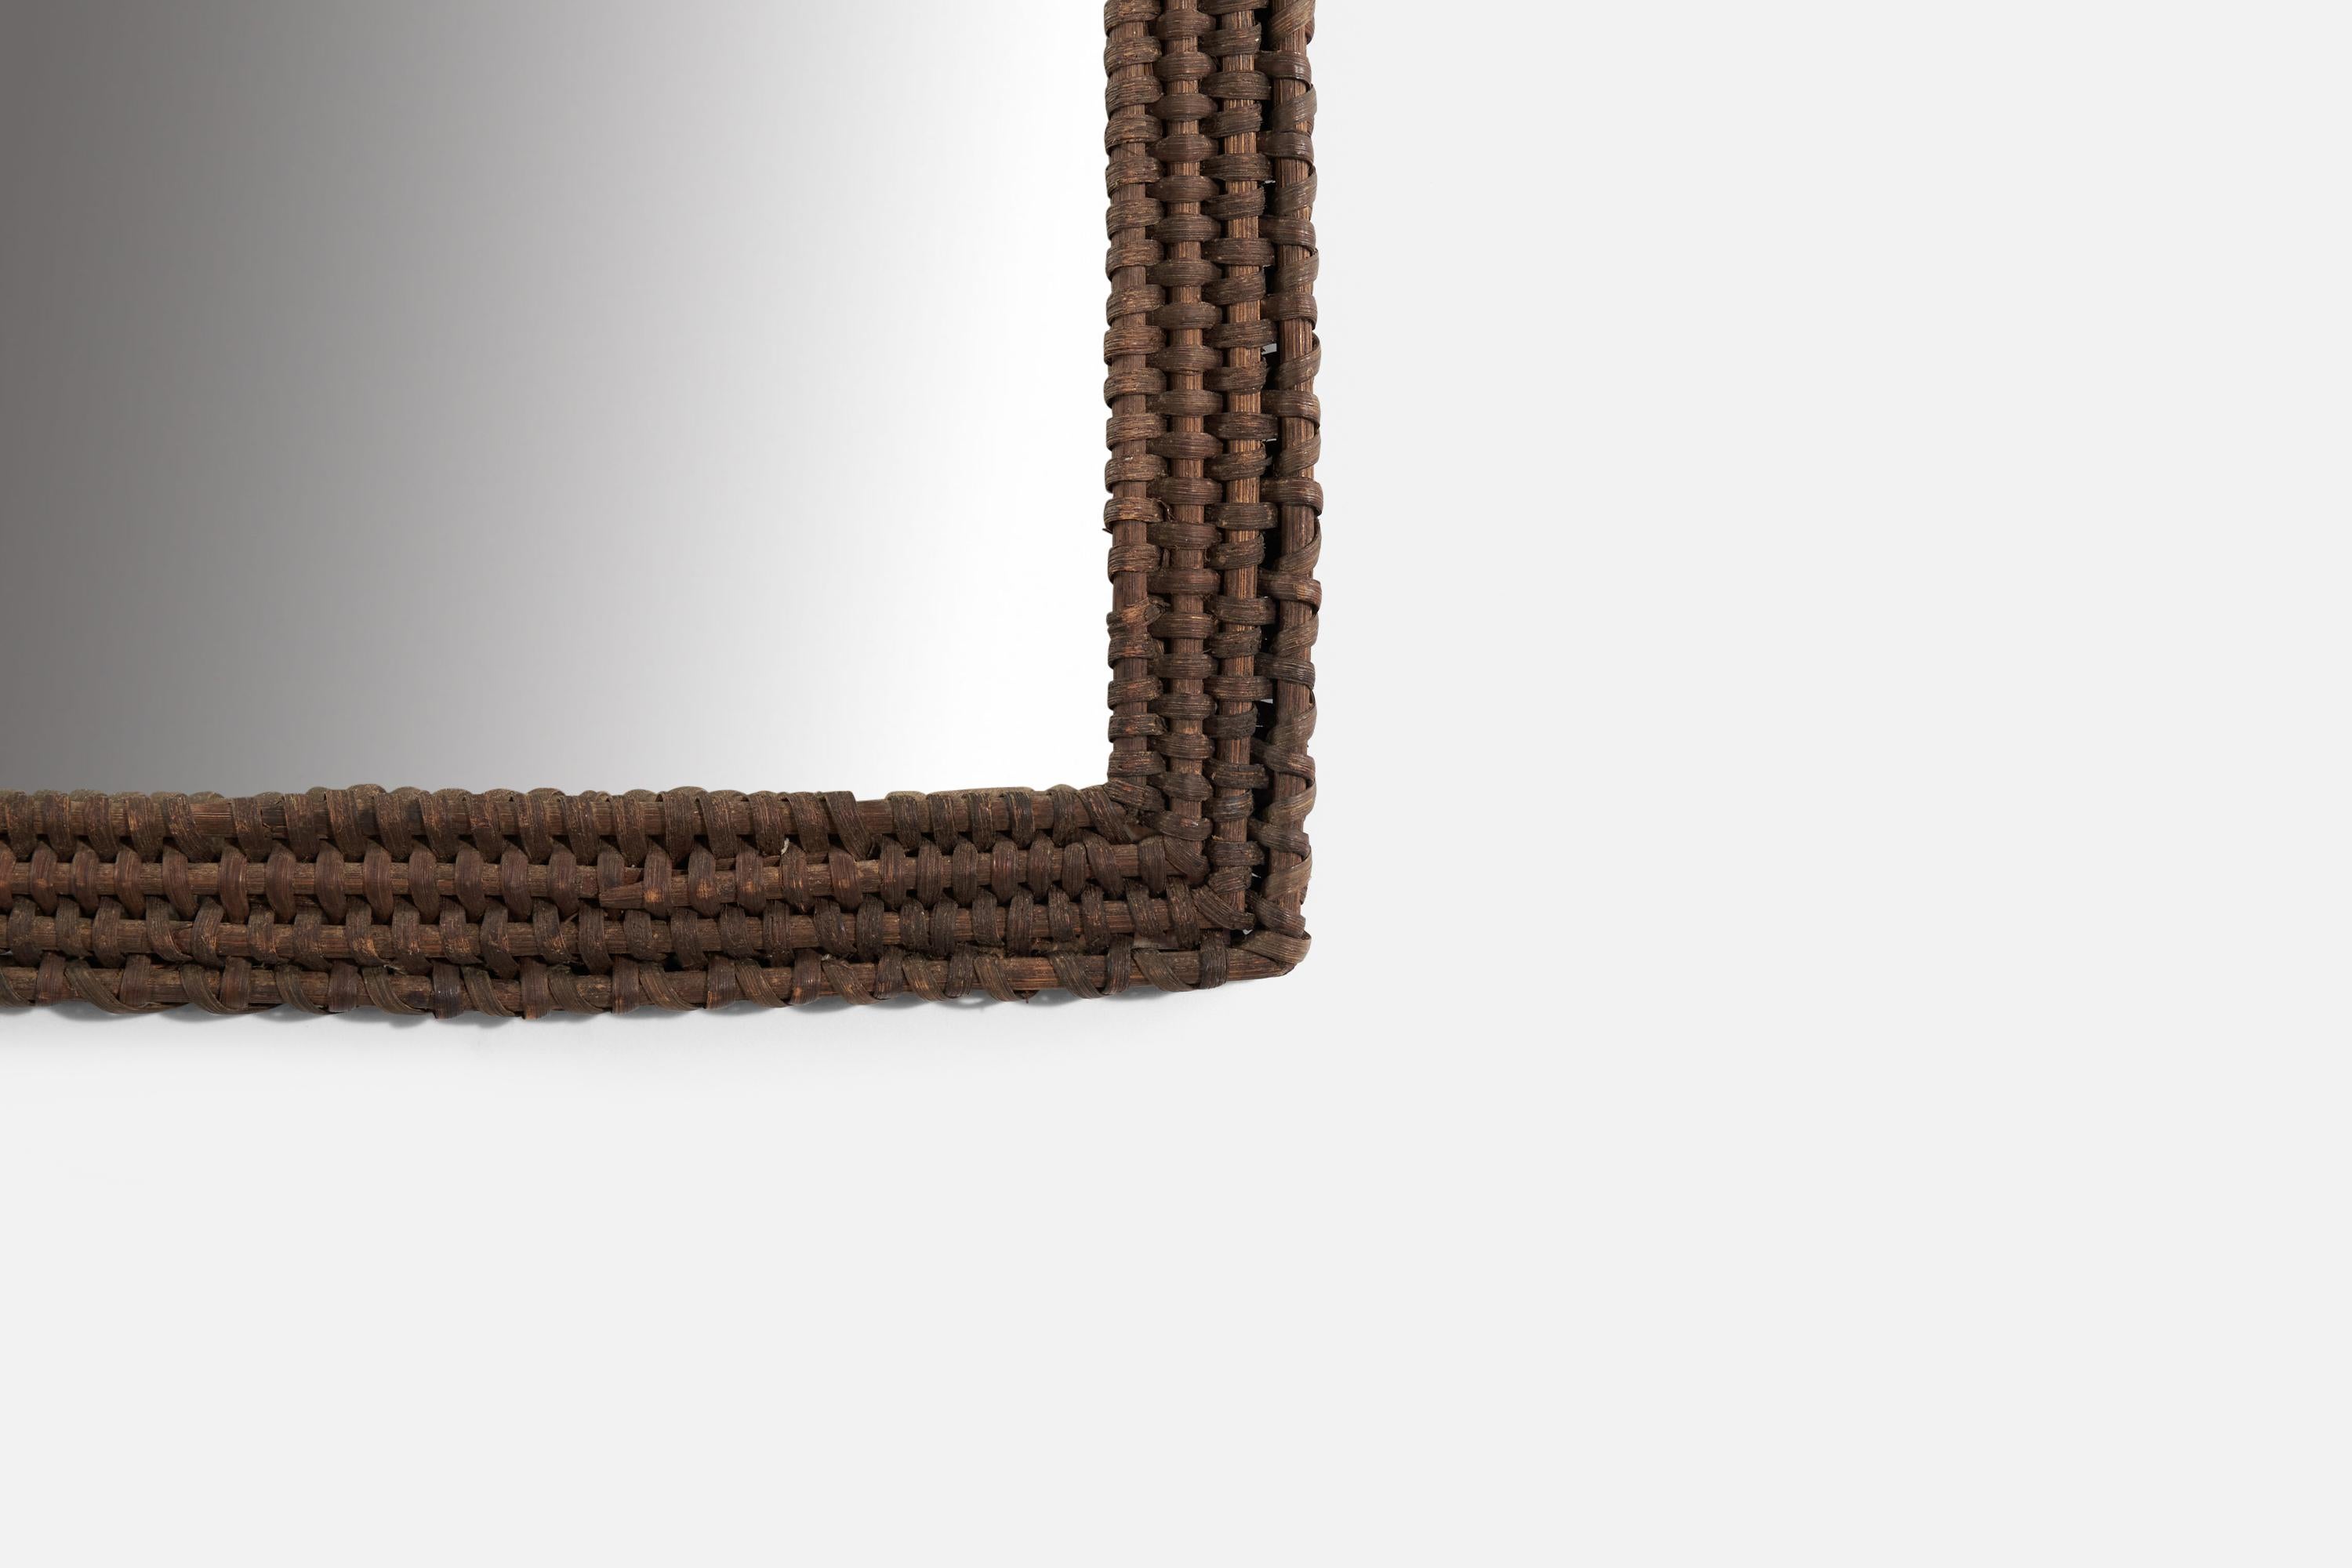 Italian Designer, Wall Mirror, Dark-Stained Rattan, Italy, 1950s For Sale 1